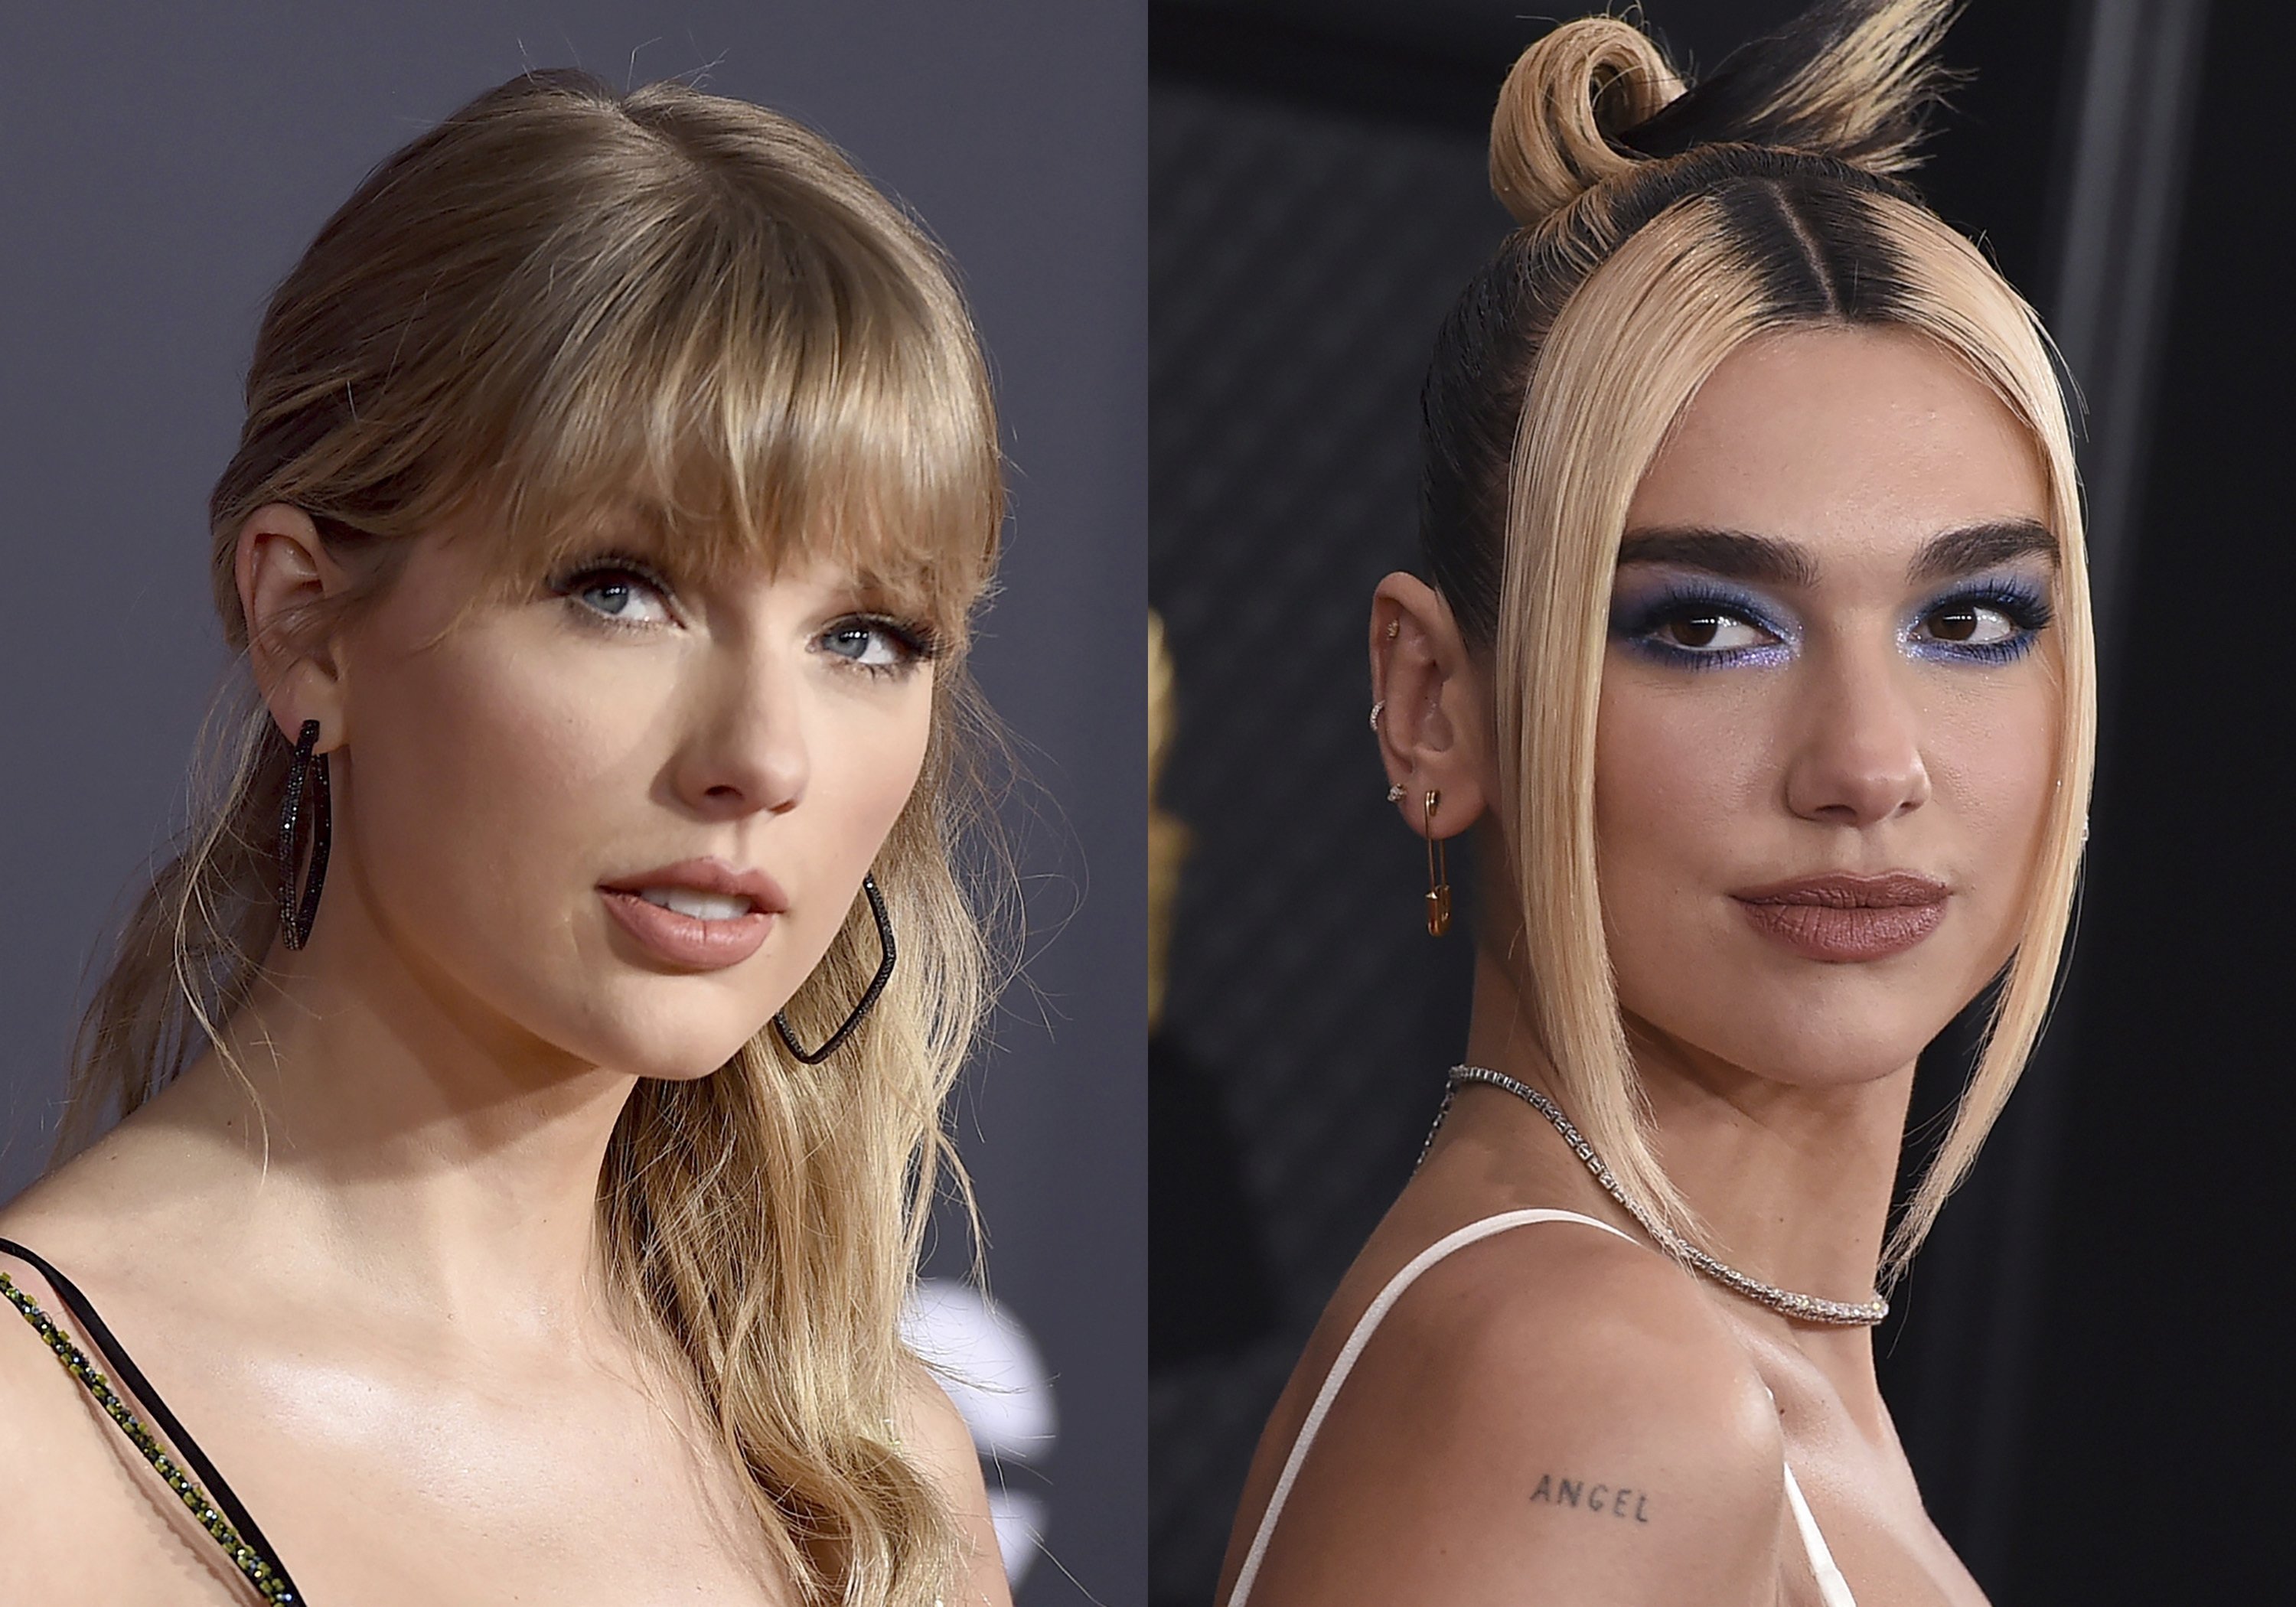 This file photo shows Taylor Swift (L) at the American Music Awards in Los Angeles on Nov. 24, 2019, and Dua Lipa at the 62nd annual Grammy Awards in Los Angeles on Jan. 26, 2020.  (AP Photo)